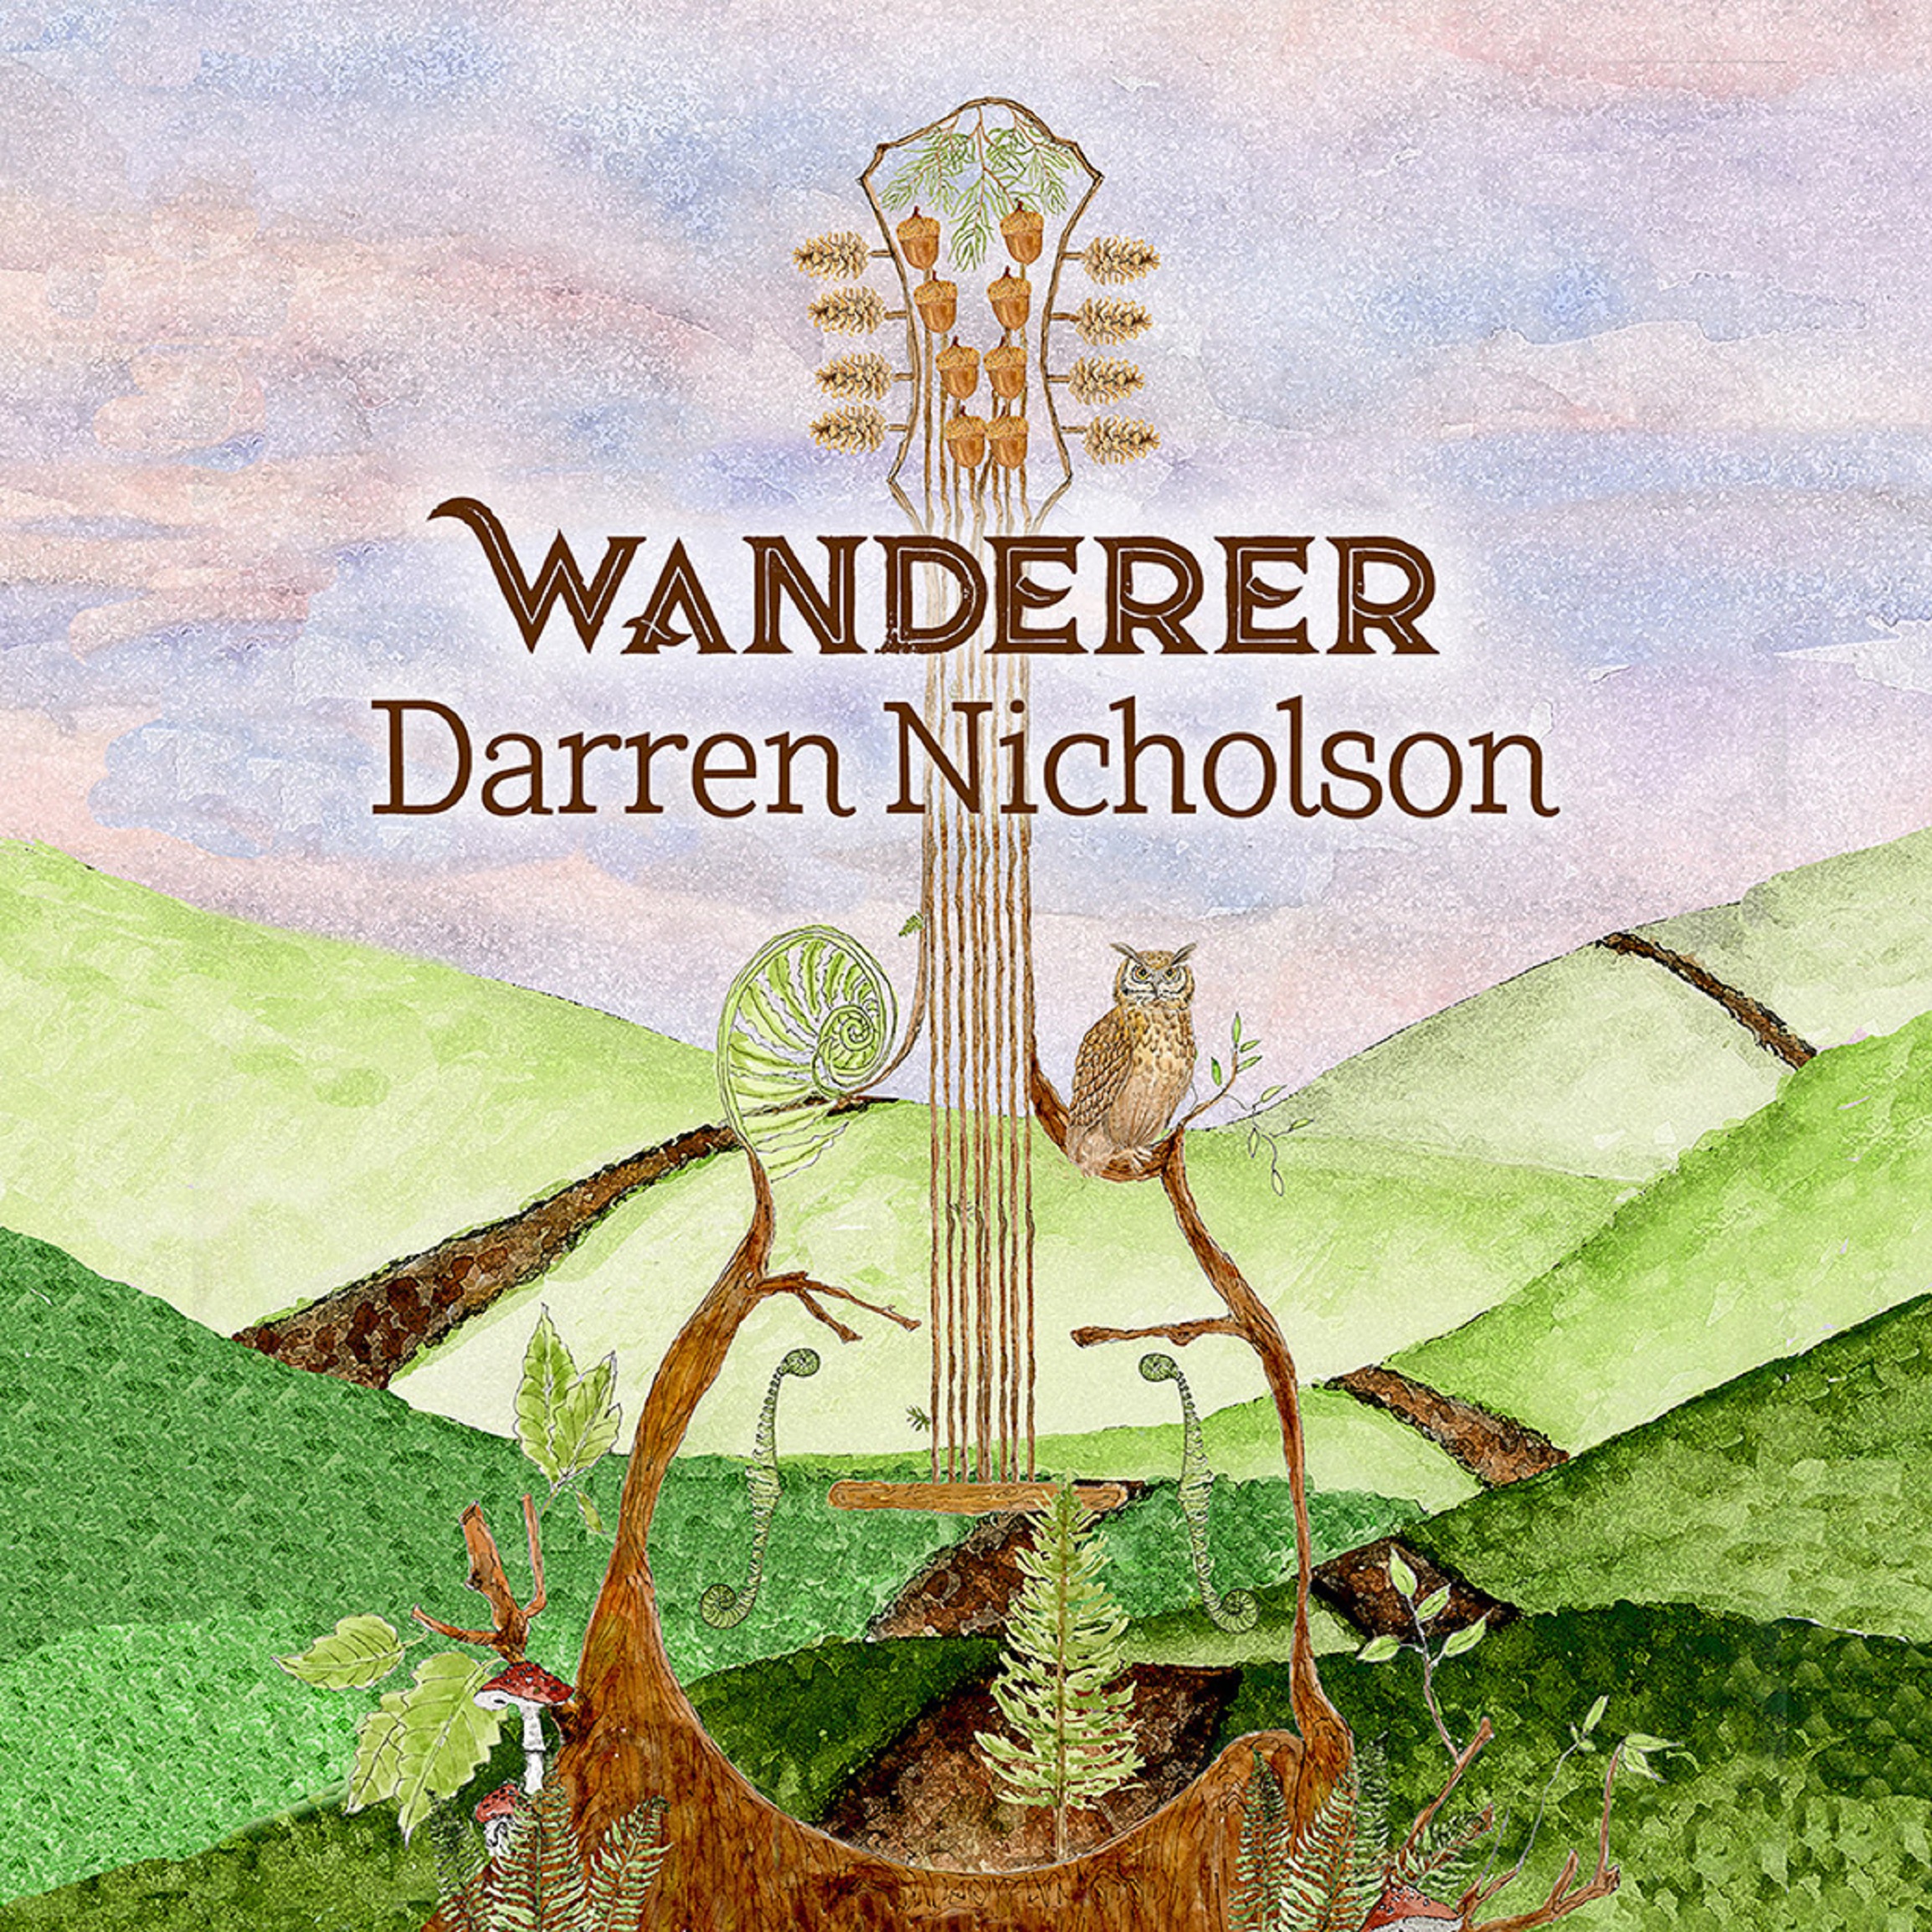 On Wanderer, Darren Nicholson forges his own musical path